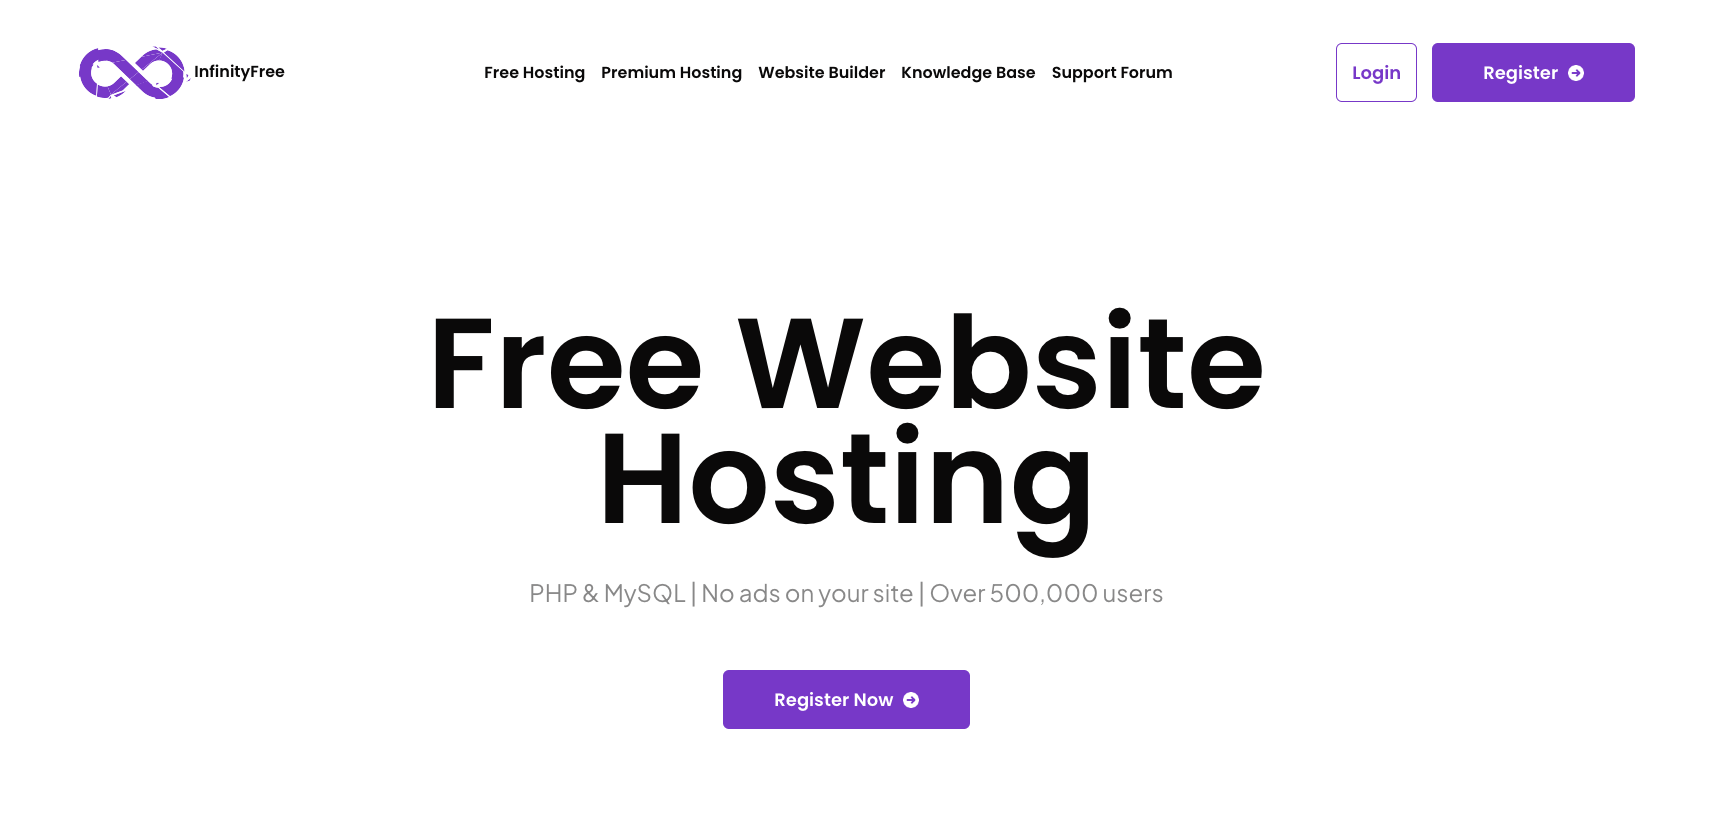 Free Web Hosting and Domains (InfinityFree)